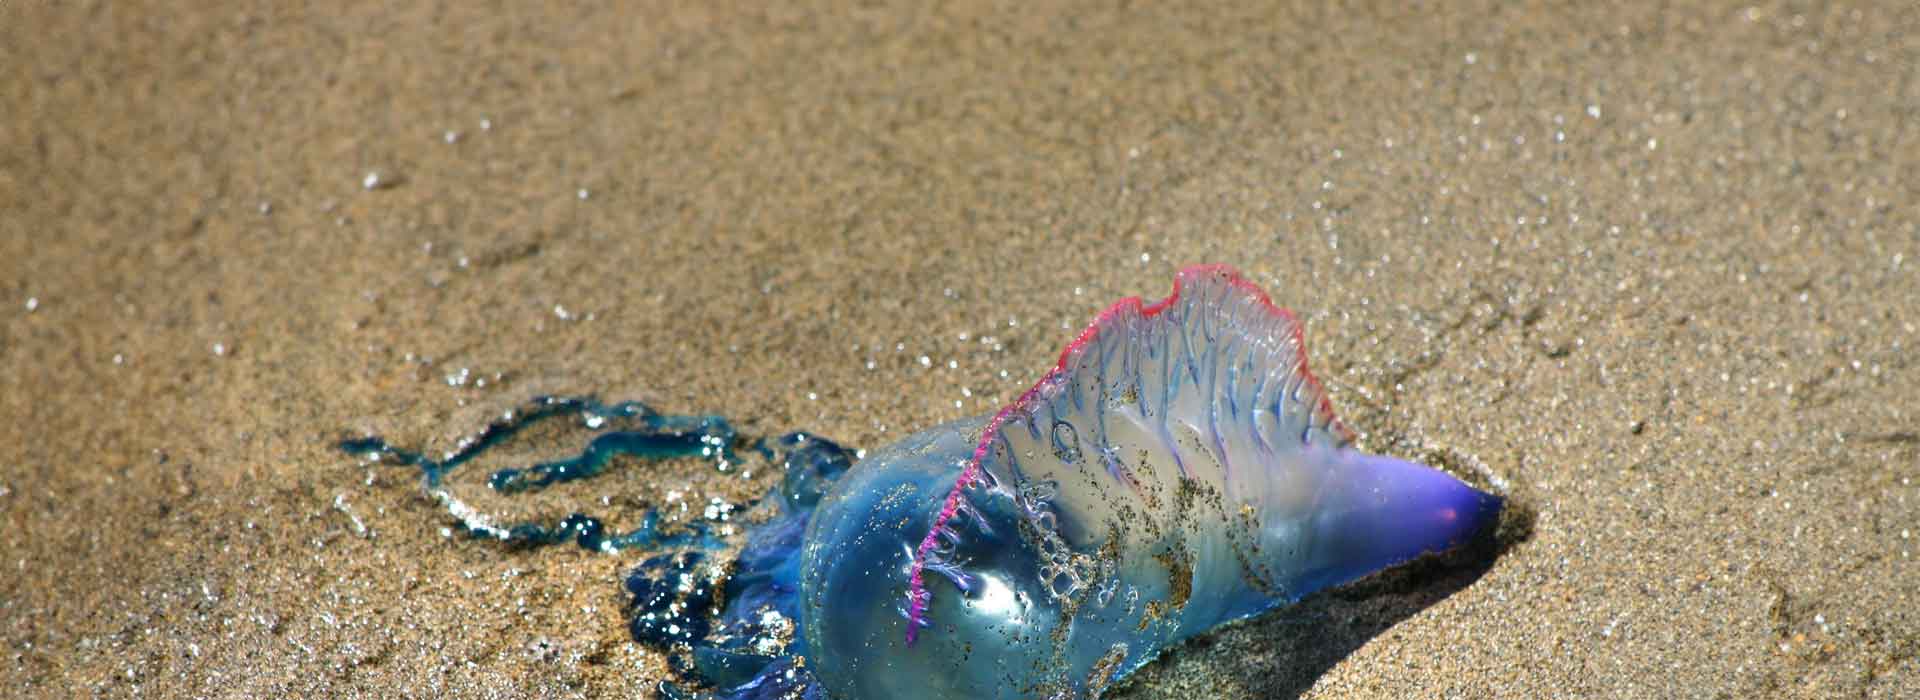 A Portuguese man o’ war washed up on the beach after a storm.